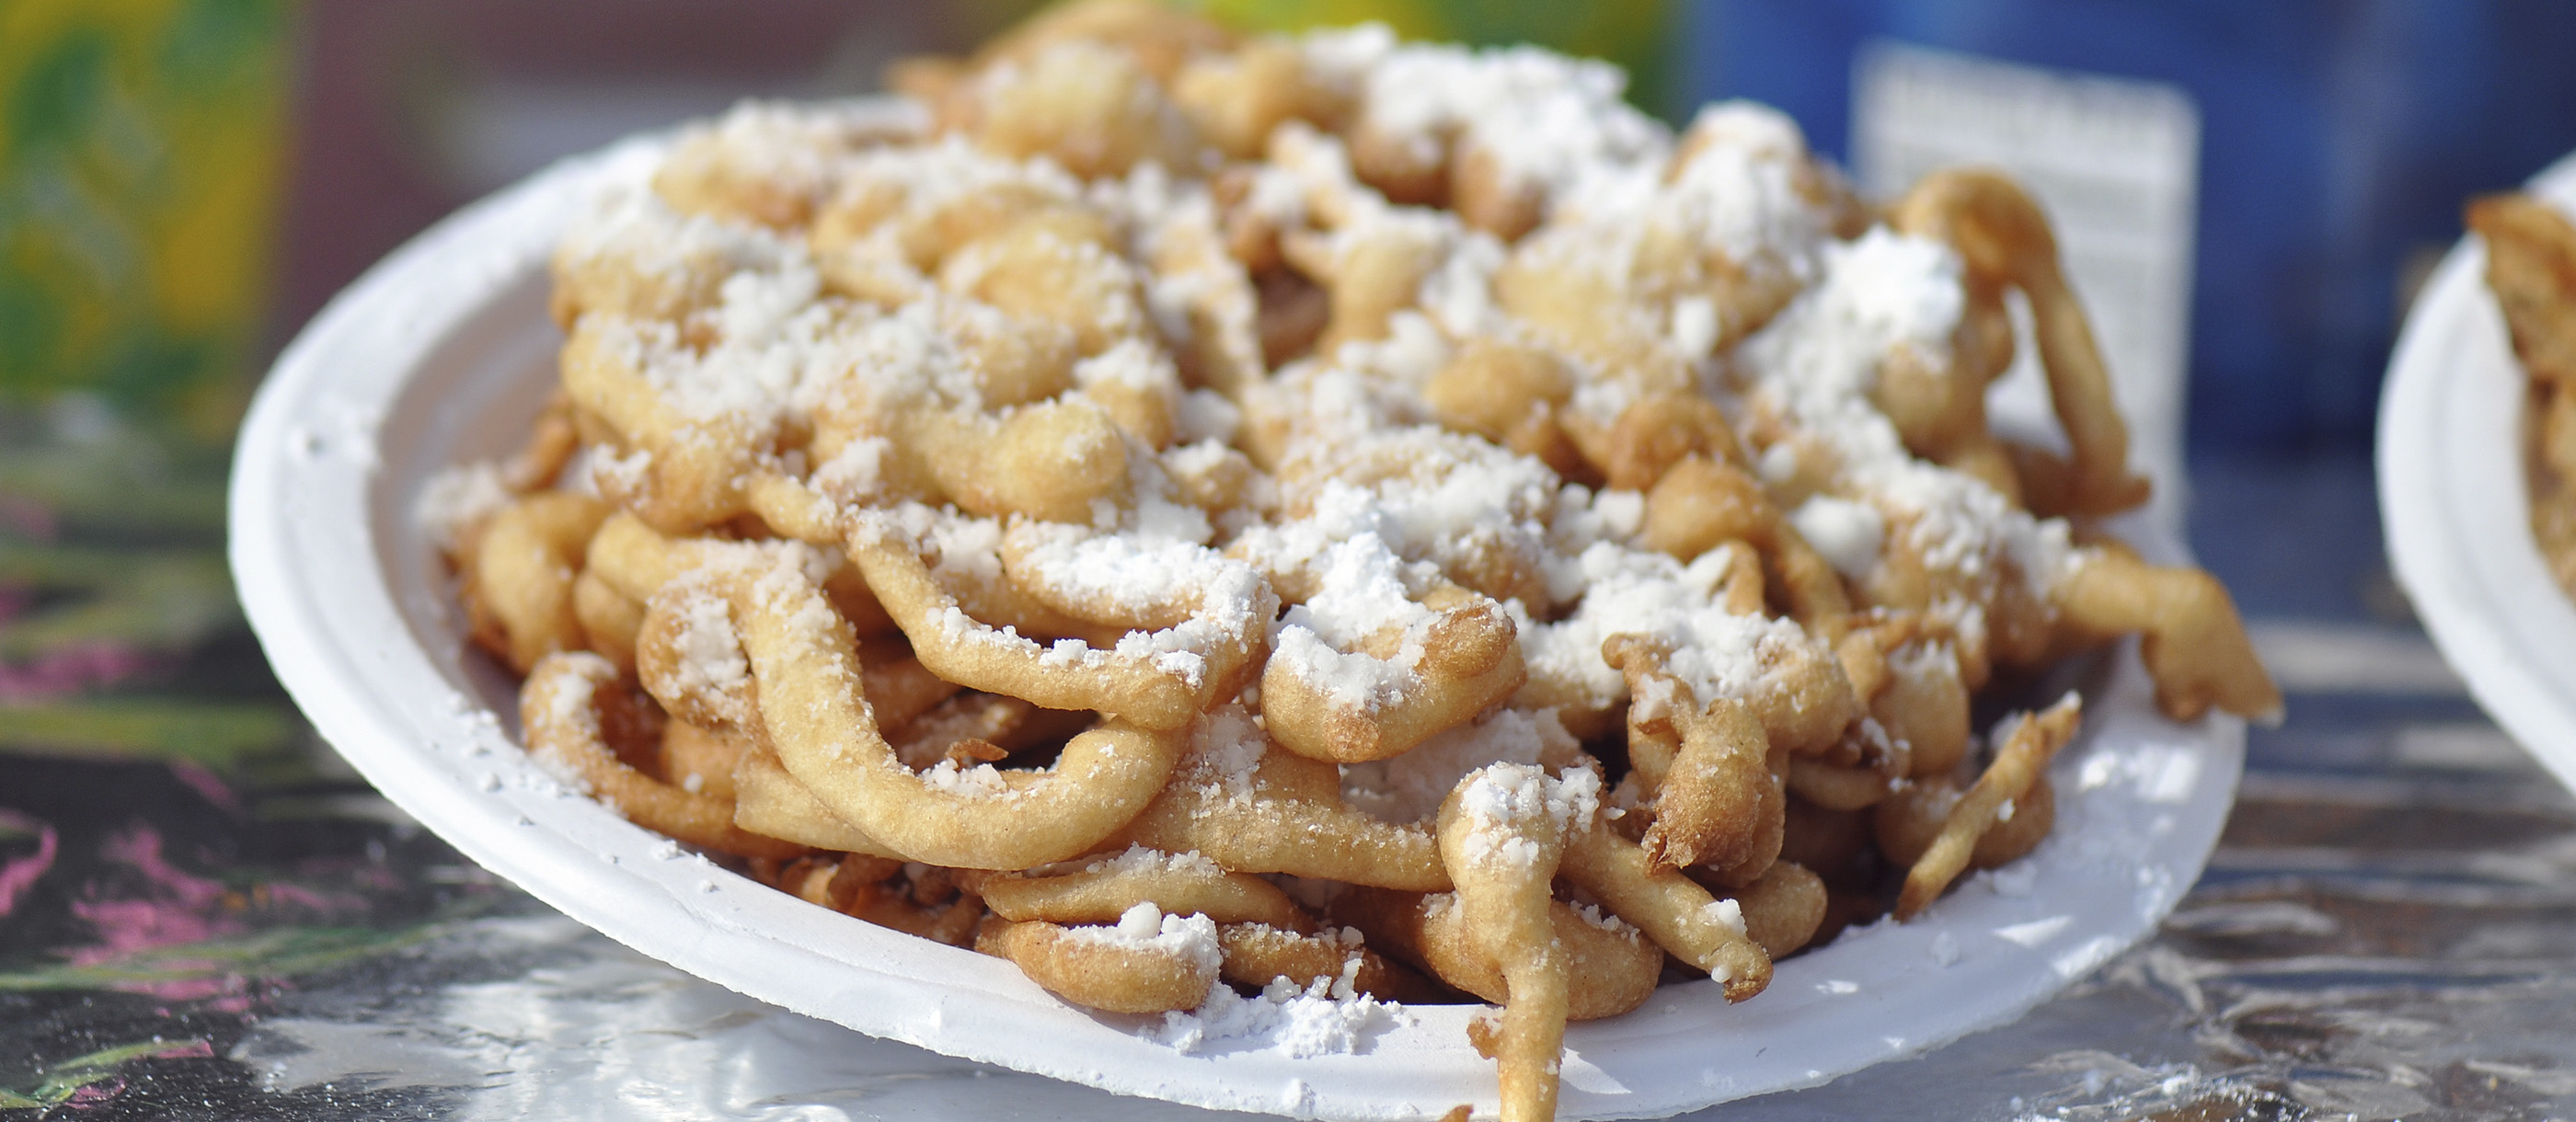 Where To Get Funnel Cake? Here Are The Best Places To Try!